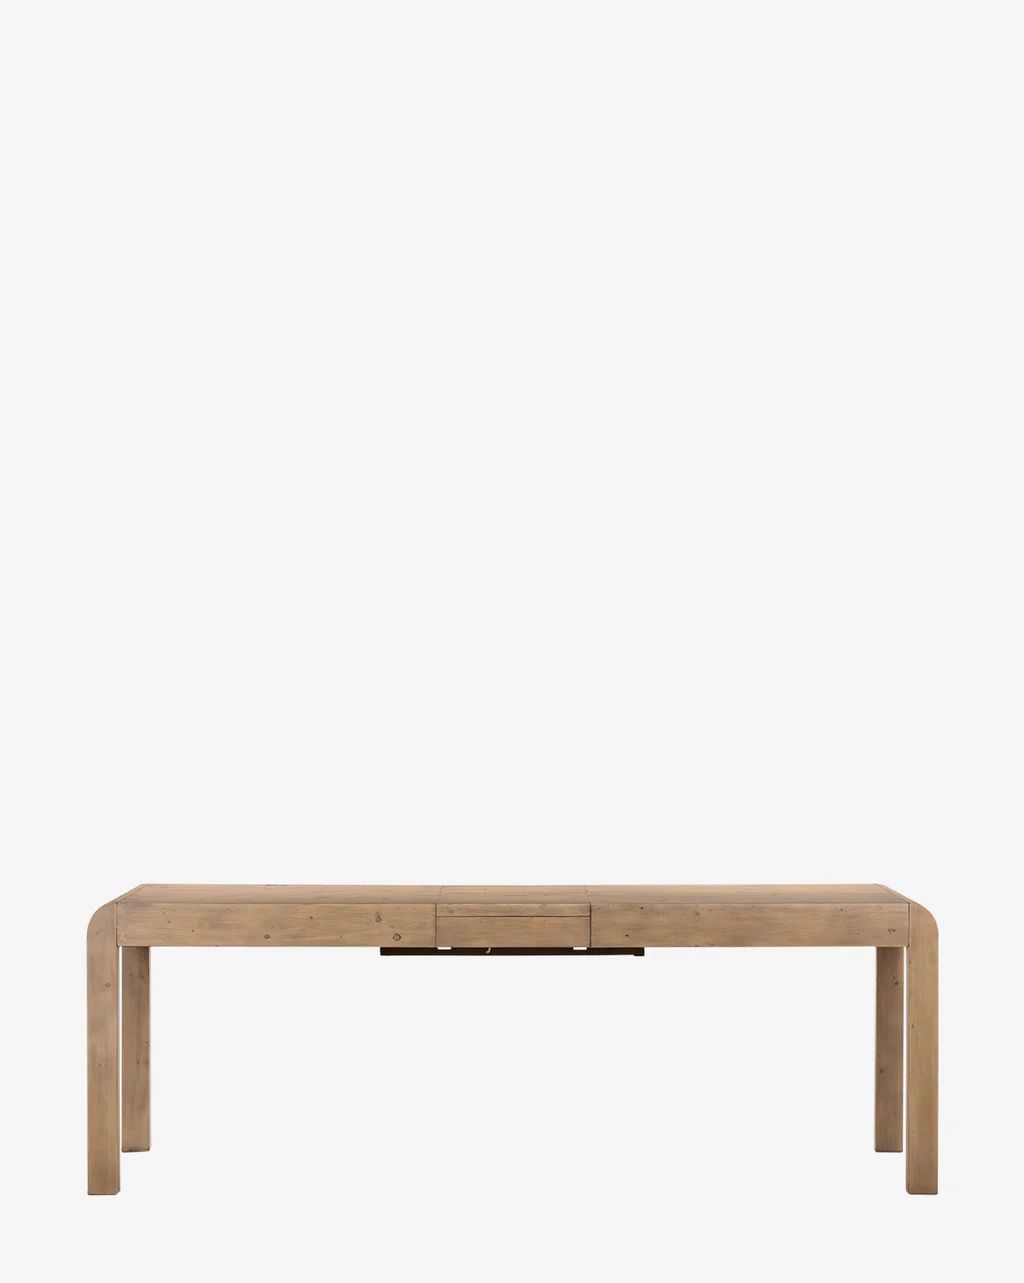 Elisha Extension Dining Table | McGee & Co.